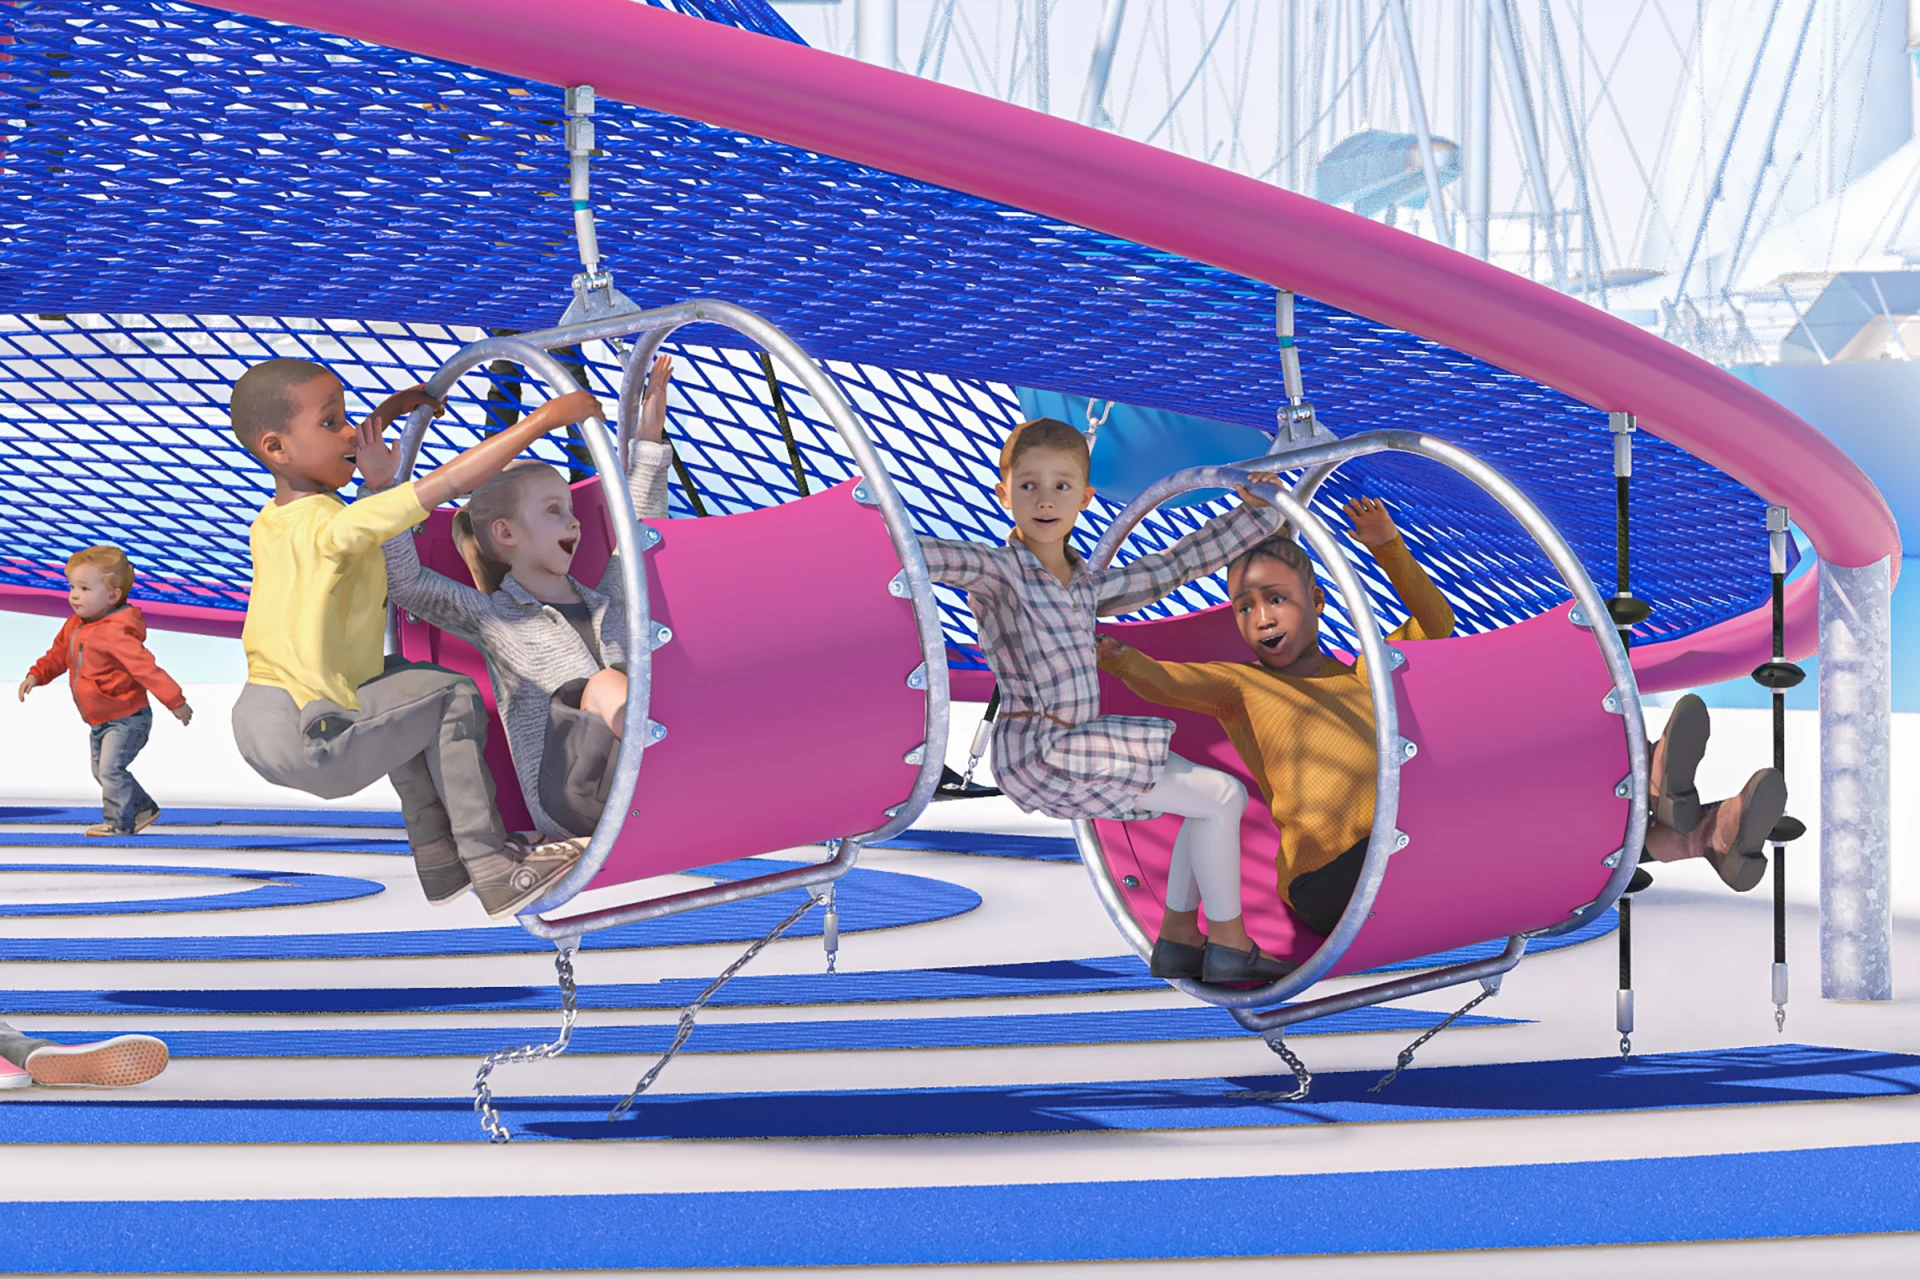 Concept design of children playing and swinging on the hanging pods of a rope net structure